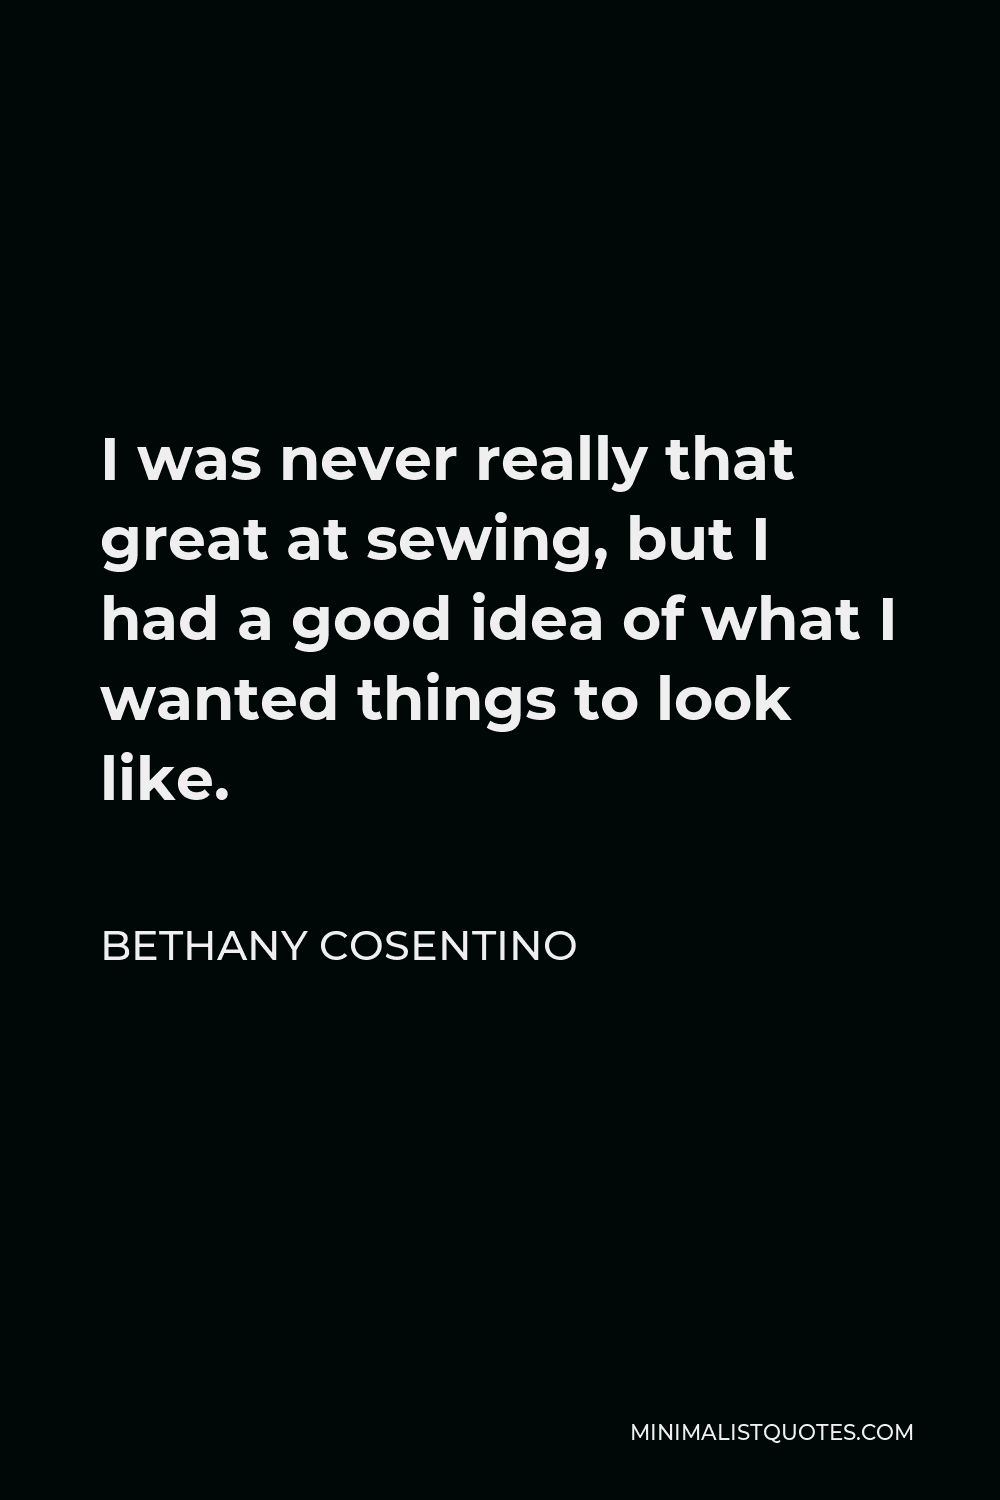 Bethany Cosentino Quote - I was never really that great at sewing, but I had a good idea of what I wanted things to look like.